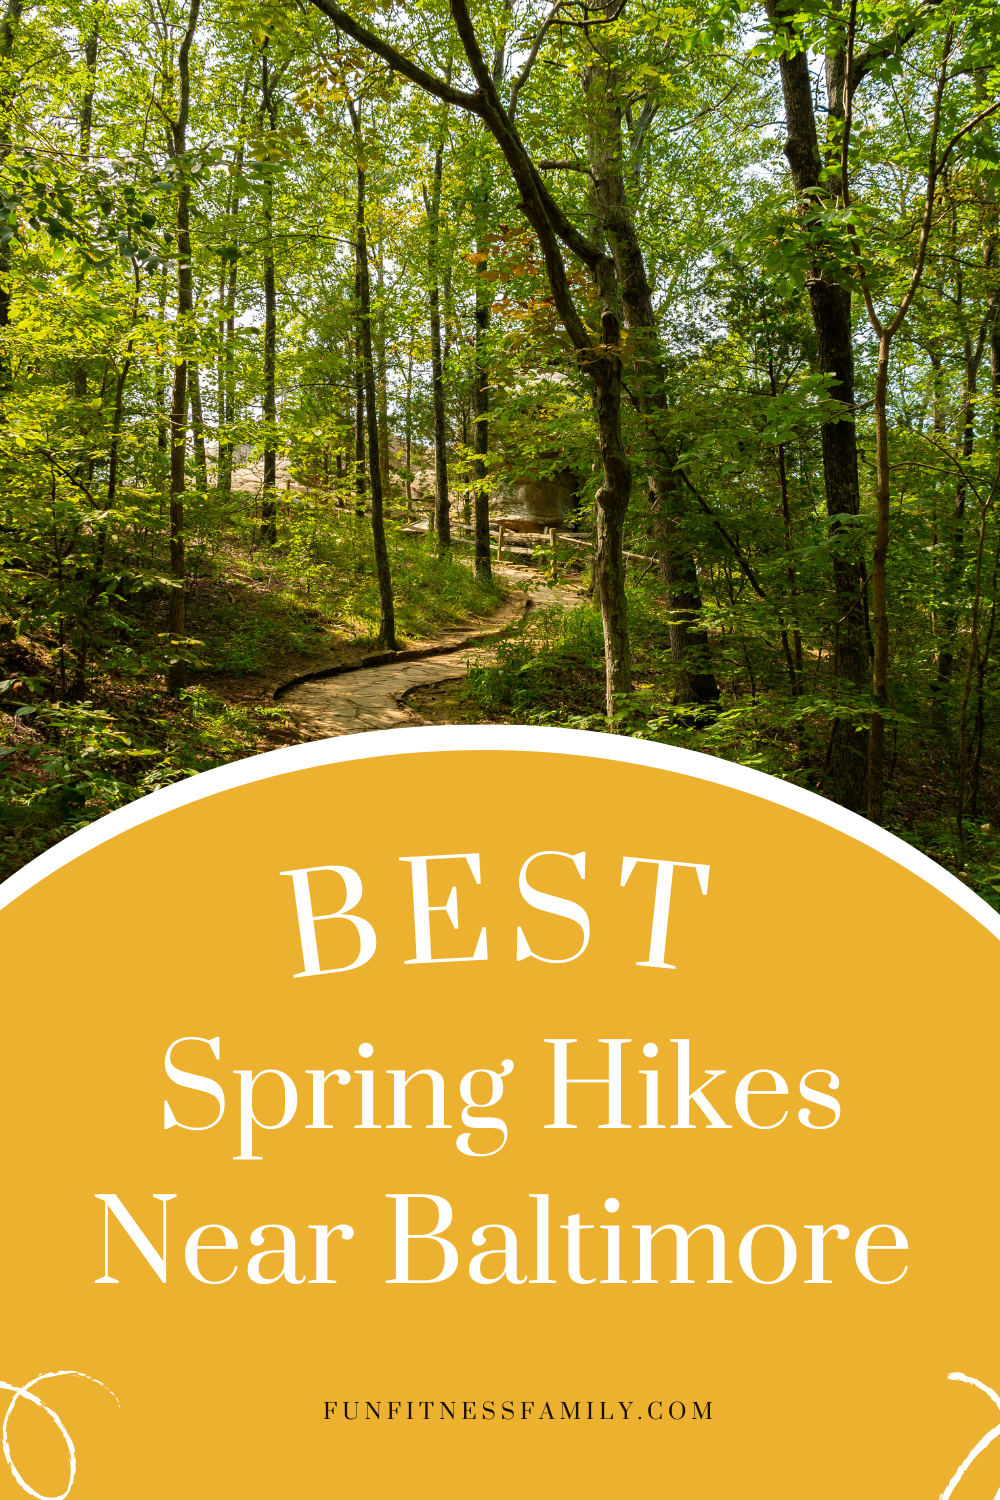 Best places to hike near Baltimore for families. #baltimore #hiking #baltimorehiking #maryland #familytravel